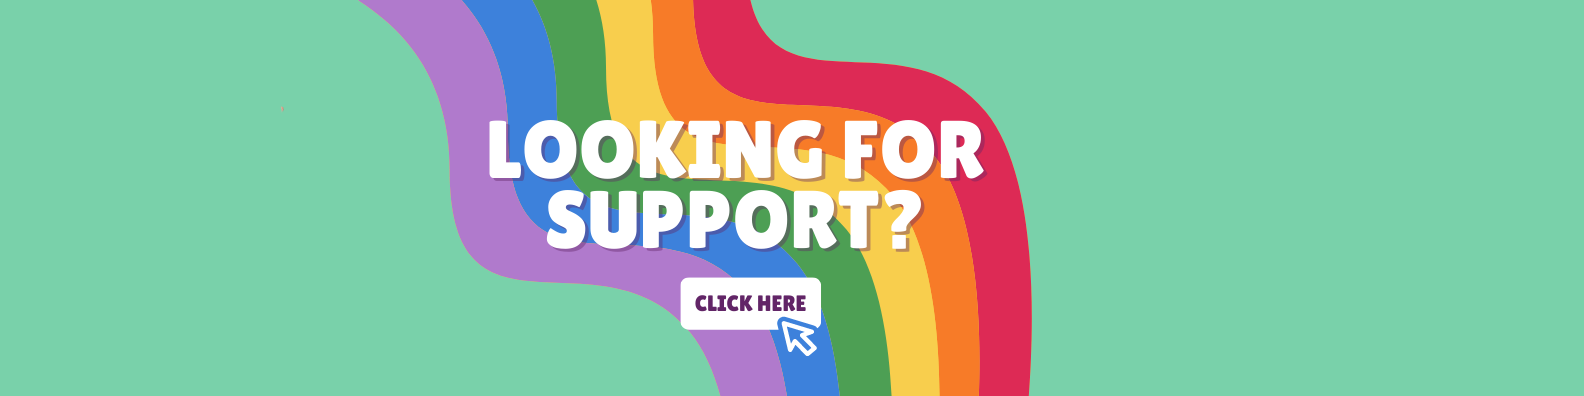 LGBT Looking for support?